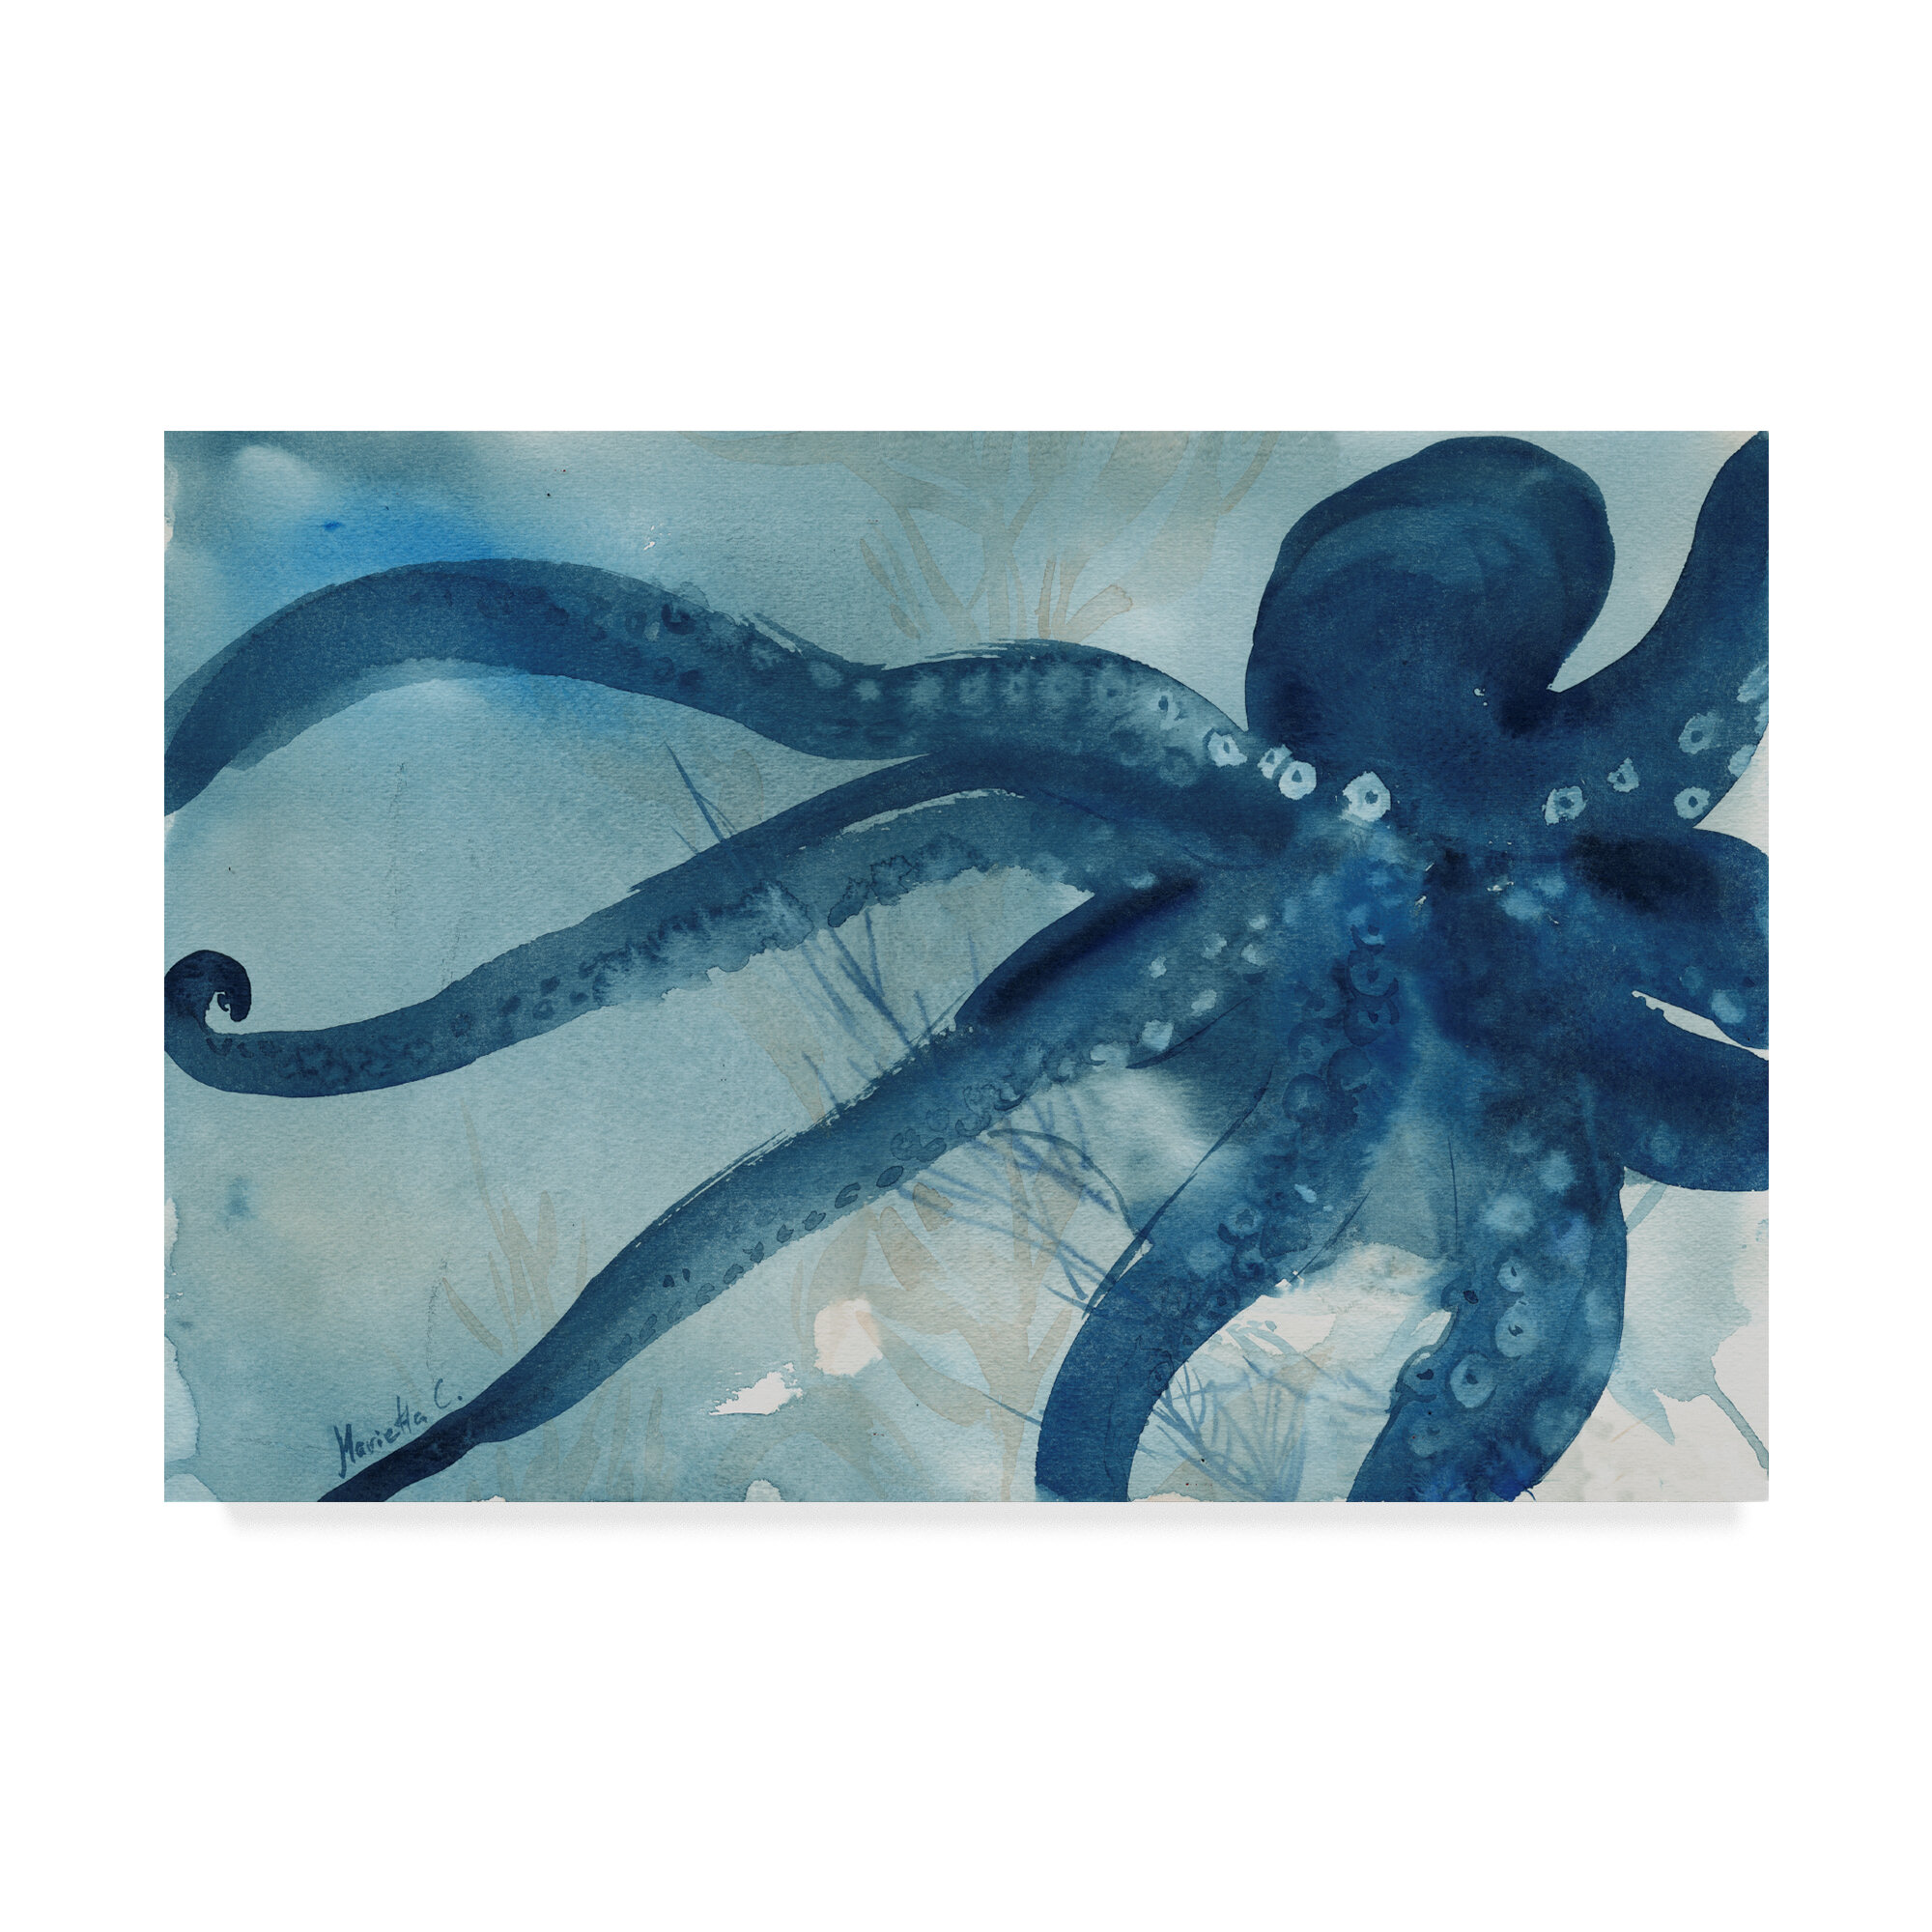 Octopus Art Print Watercolor Painting Colorful Vibrant Wall Decor